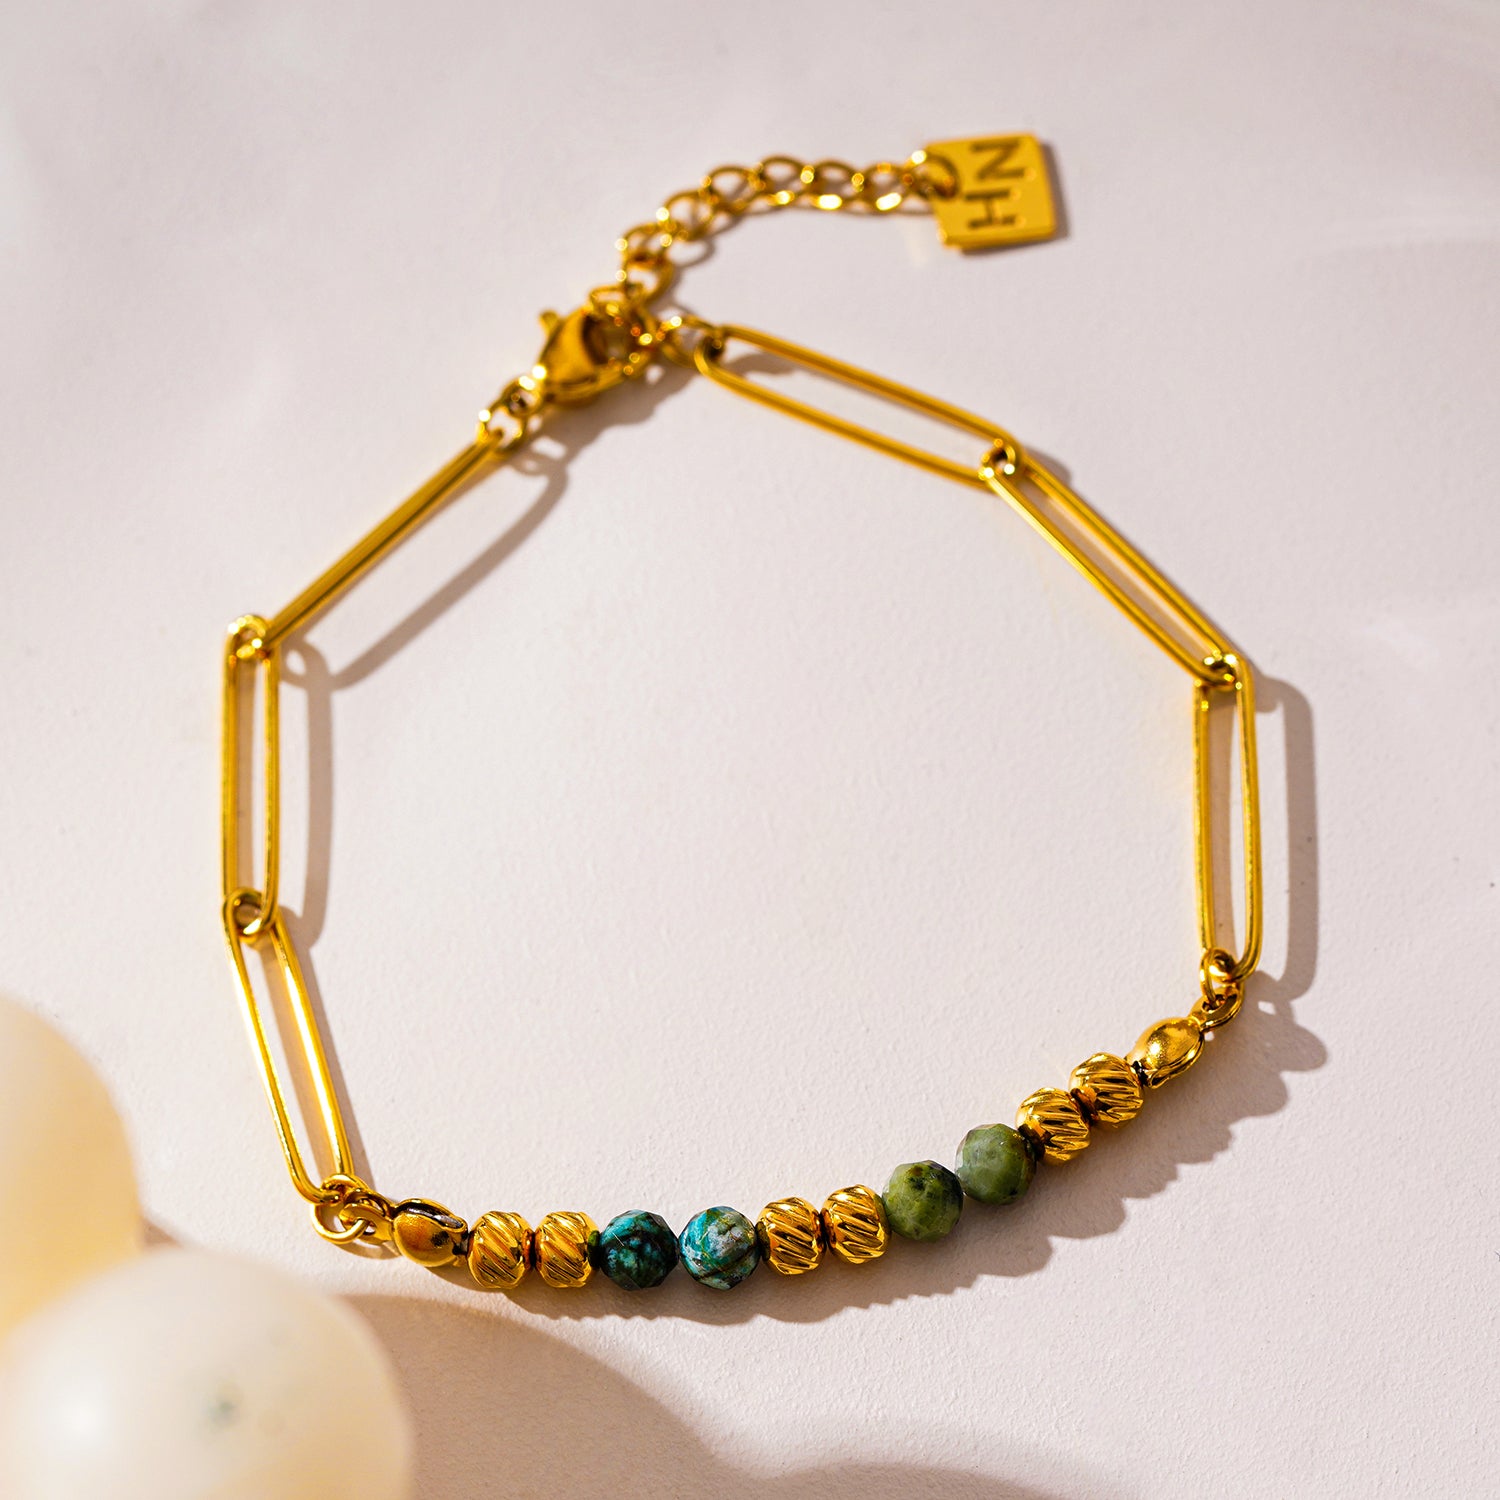 Style AIJAMI 6810: Link-Chain , Gold Beads & African Turquoise Natural Stones Bracelet.